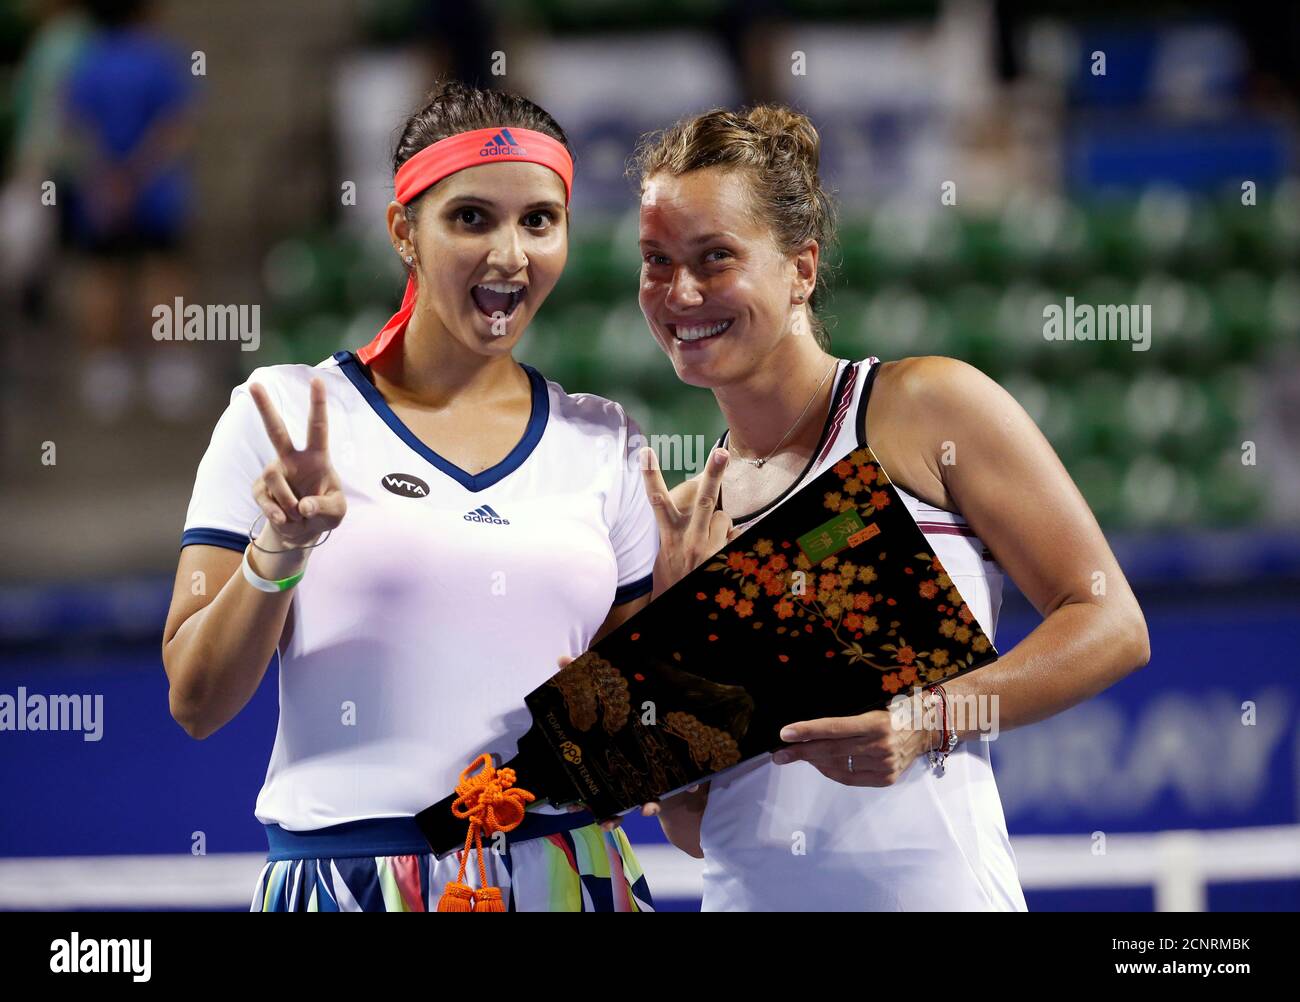 Tennis - Pan Pacific Open Women's Doubles Final match - Ariake Coliseum,  Tokyo, Japan - 24/09/16. Sania Mirza of India (L) and Barbora Strycova of  Czech Republic pose with their victory trophy.